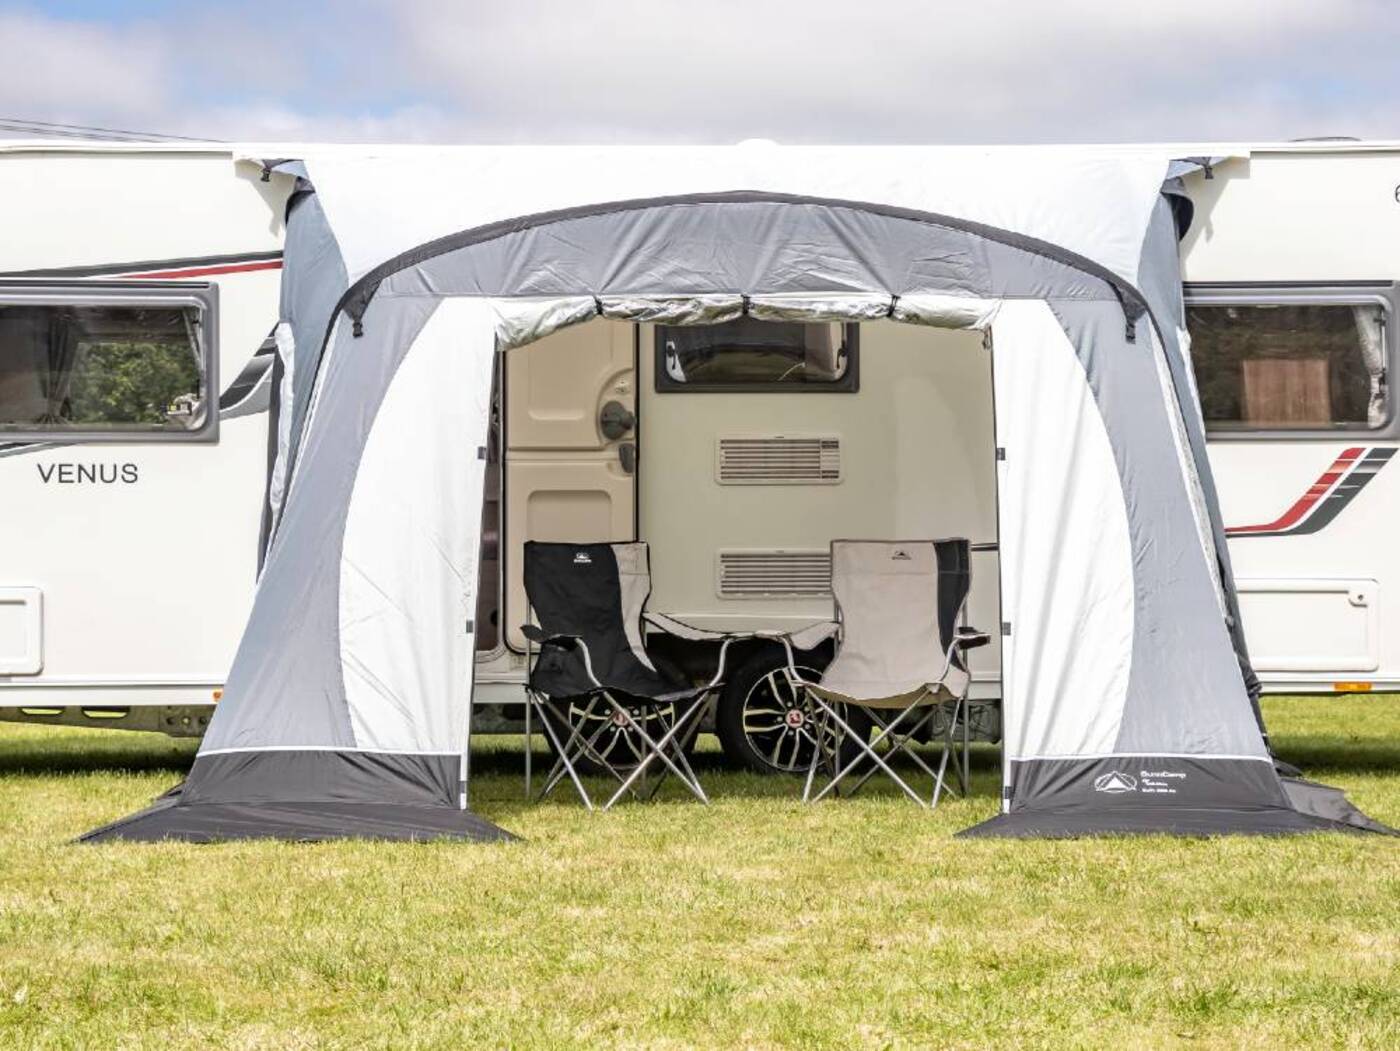 SunnCamp Sunncamp Swift 260 SC Caravan Porch Awning With Rear Upright Pads 2022 5039150226270 